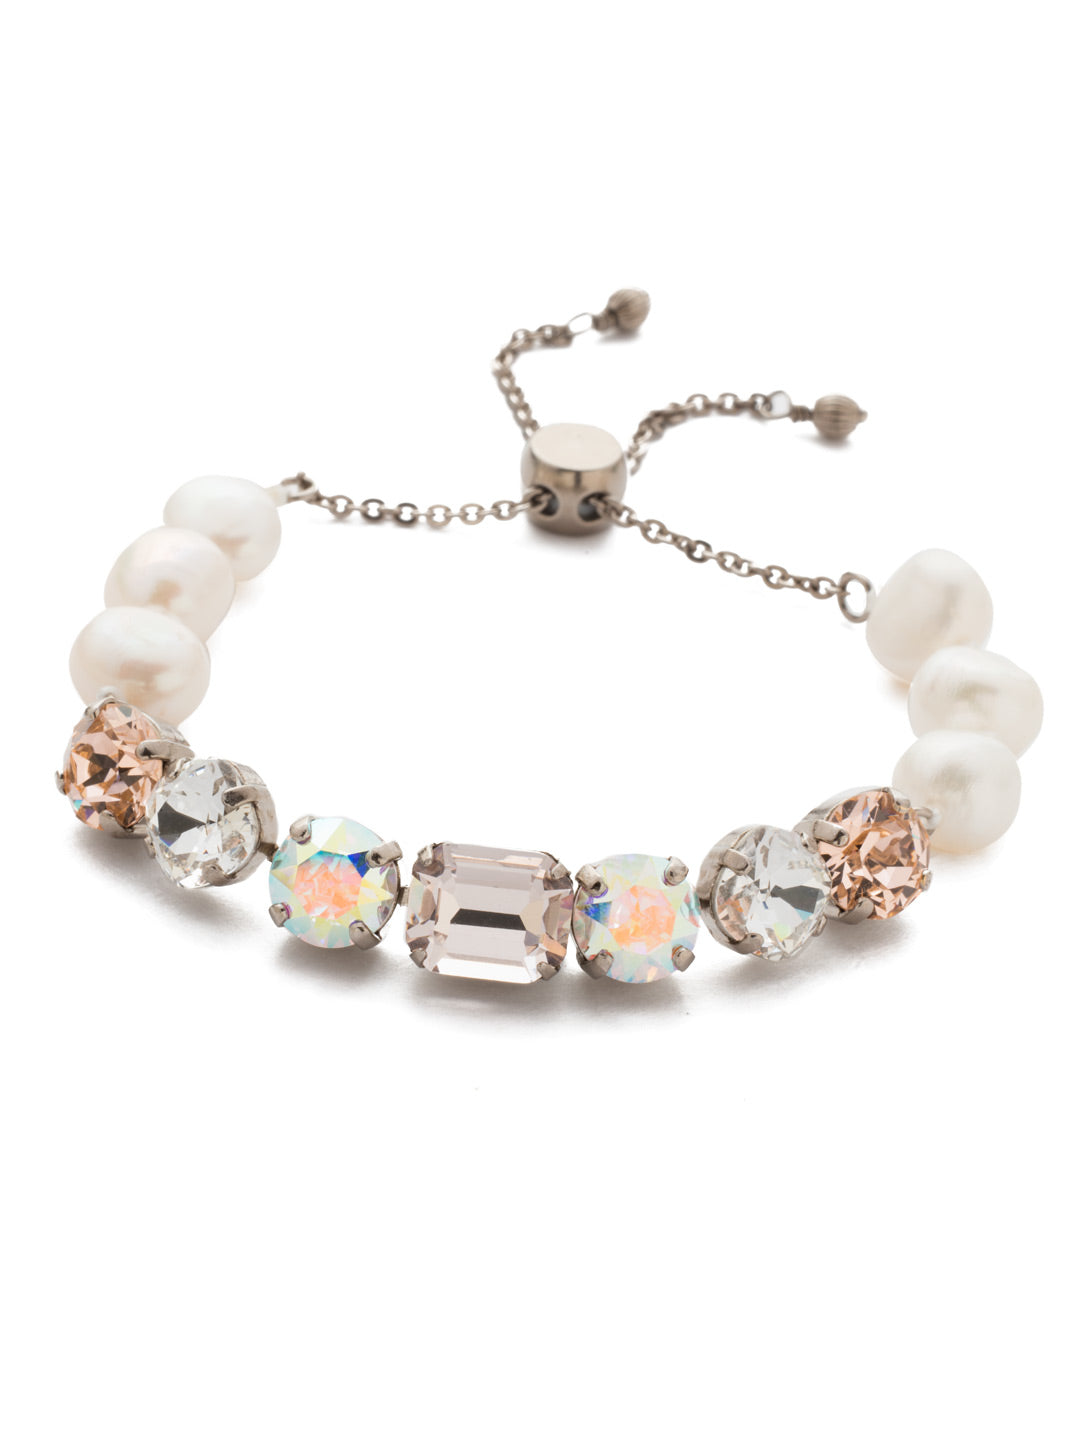 Cadenza Slider Bracelet - BEC14ASSCL - A classic line bracelet reimagined with a adjustable slider clasp. A pattern of crystals and pearls give this bracelet all around allure.